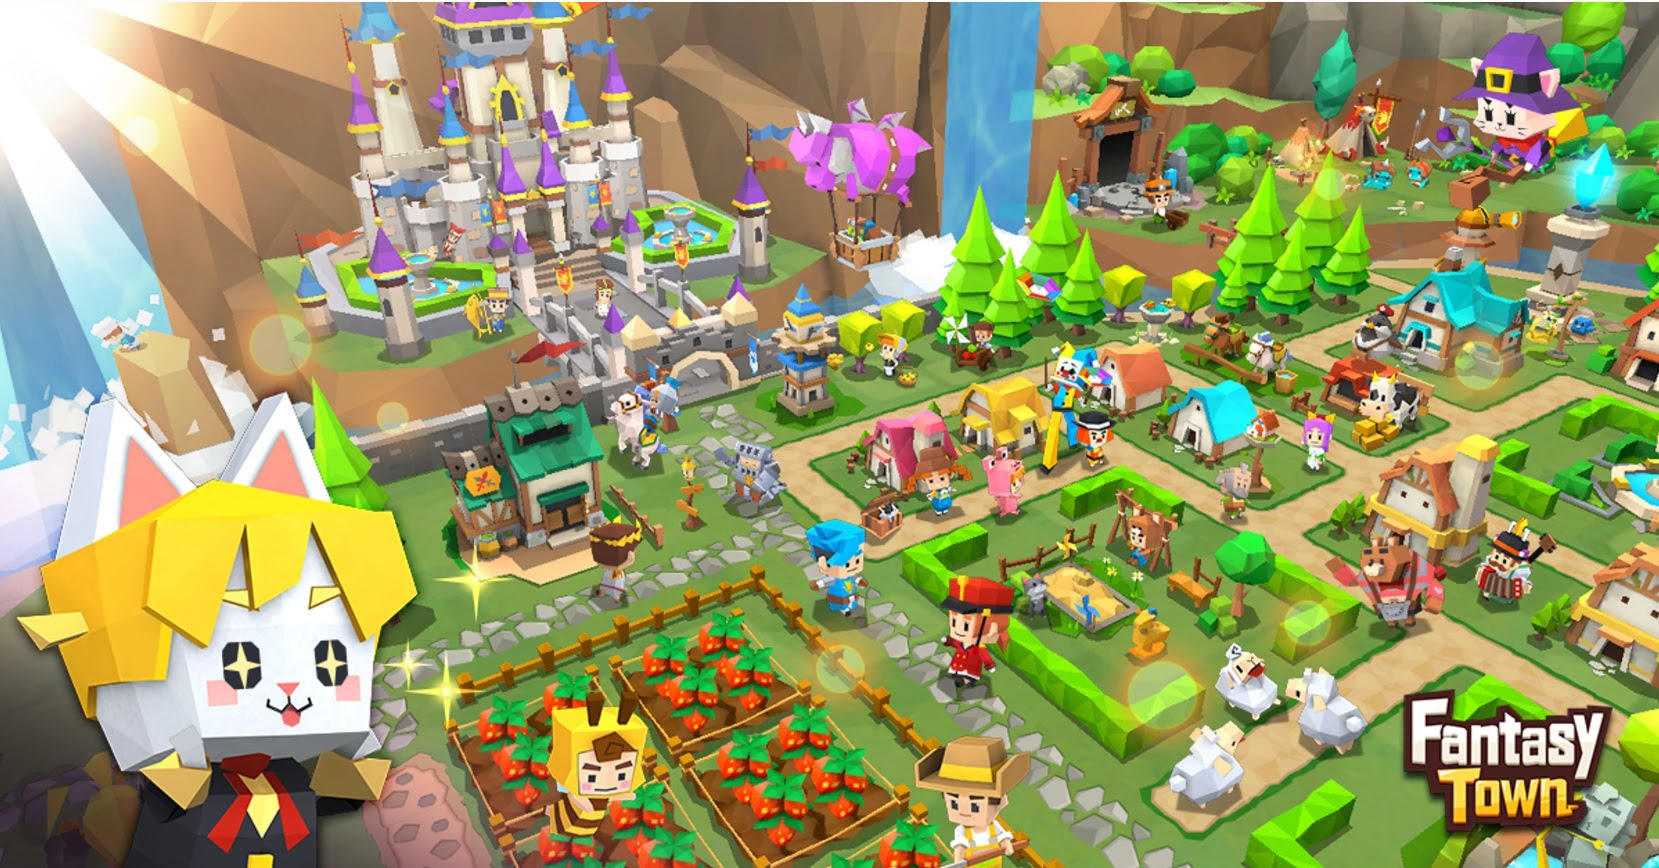 Fantasy Town Invites Mobile Players to Rule Their Own Kingdom on July 18!